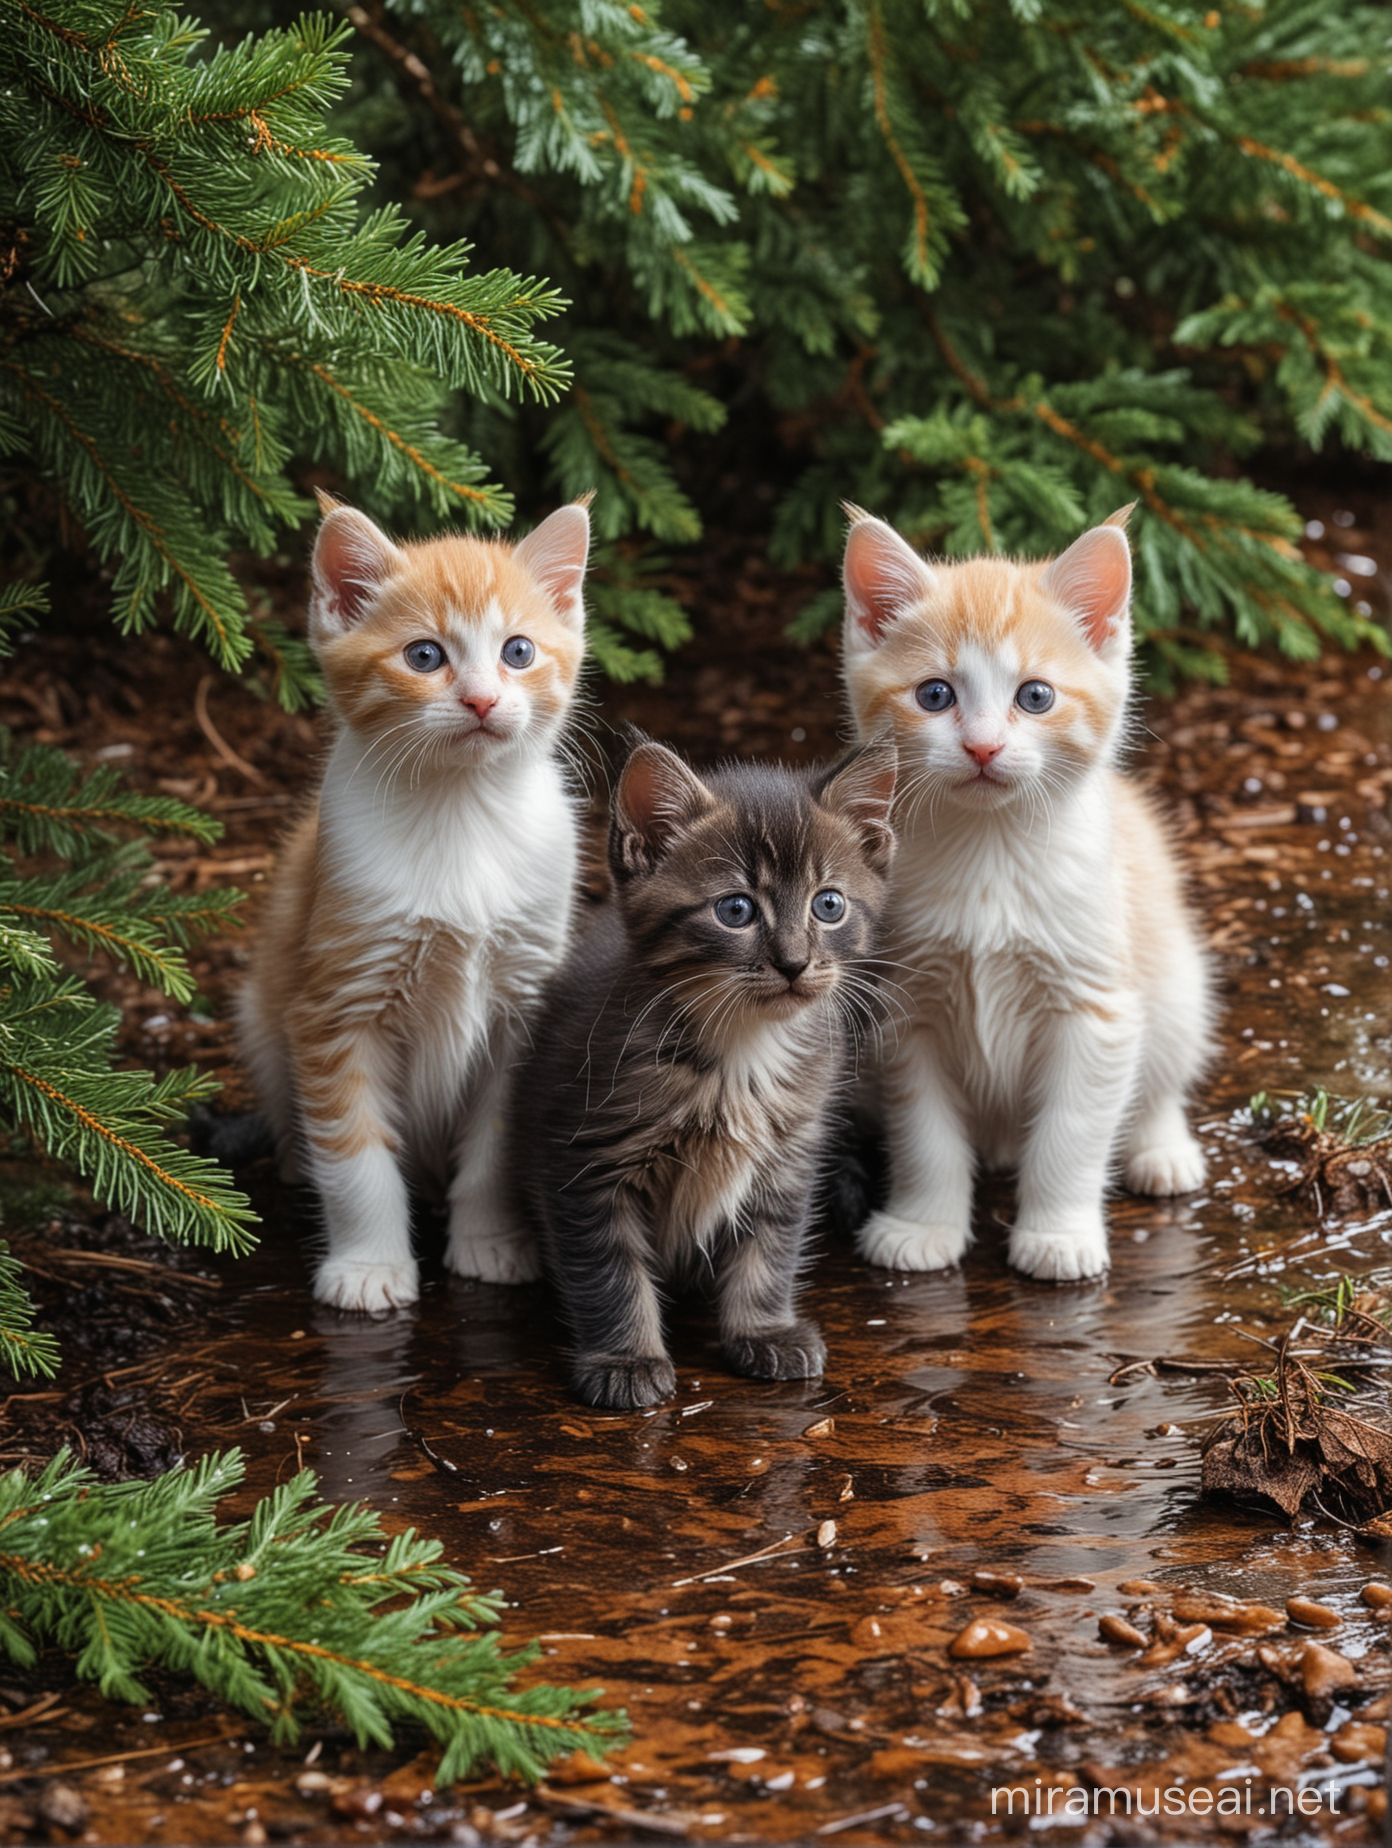 four kittens in different colors spilled and wet in the forest under the fir tree